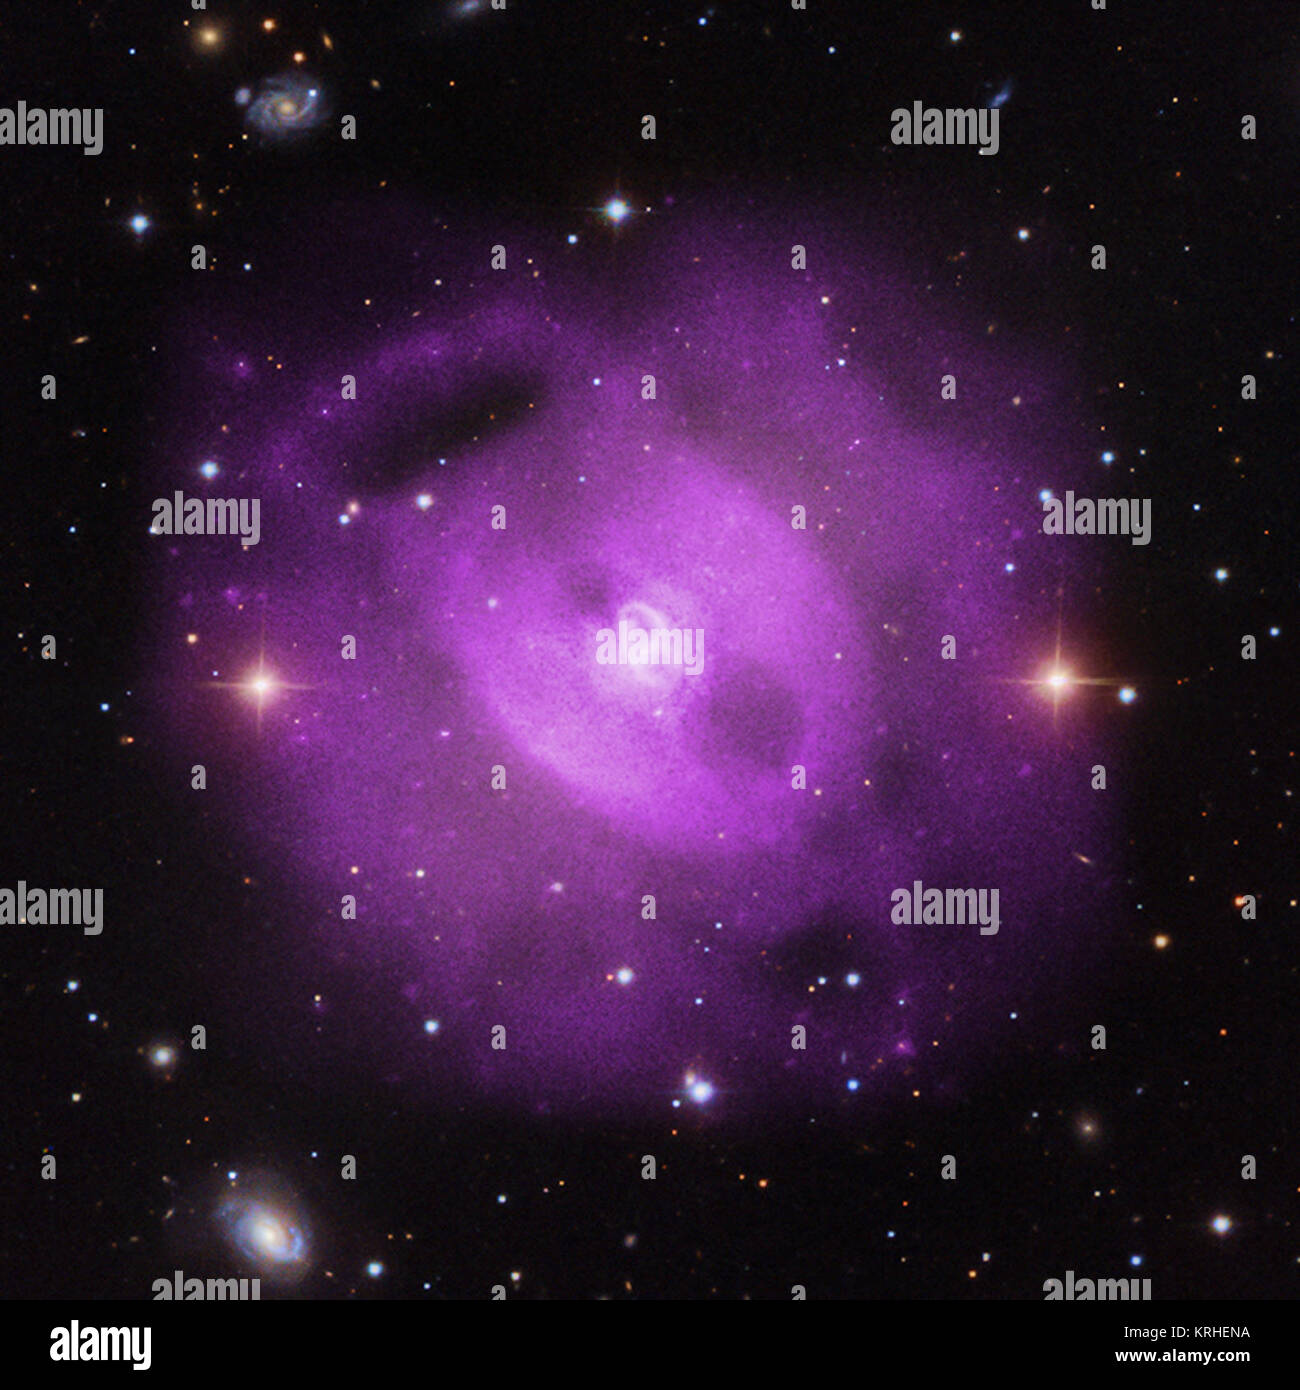 Astronomers have used NASA's Chandra X-ray Observatory to show that a supermassive black hole at the center of a group of galaxies has erupted multiple times over a period lasting about 50 million years. Evidence for the eruptions can be found in the cavities, or bubbles, carved out of the hot gas that envelops the galaxies and glows in X-rays. This composite image contains the X-rays from Chandra (pink) that have been combined with visible light data (gold). Ngc5813 composite Stock Photo